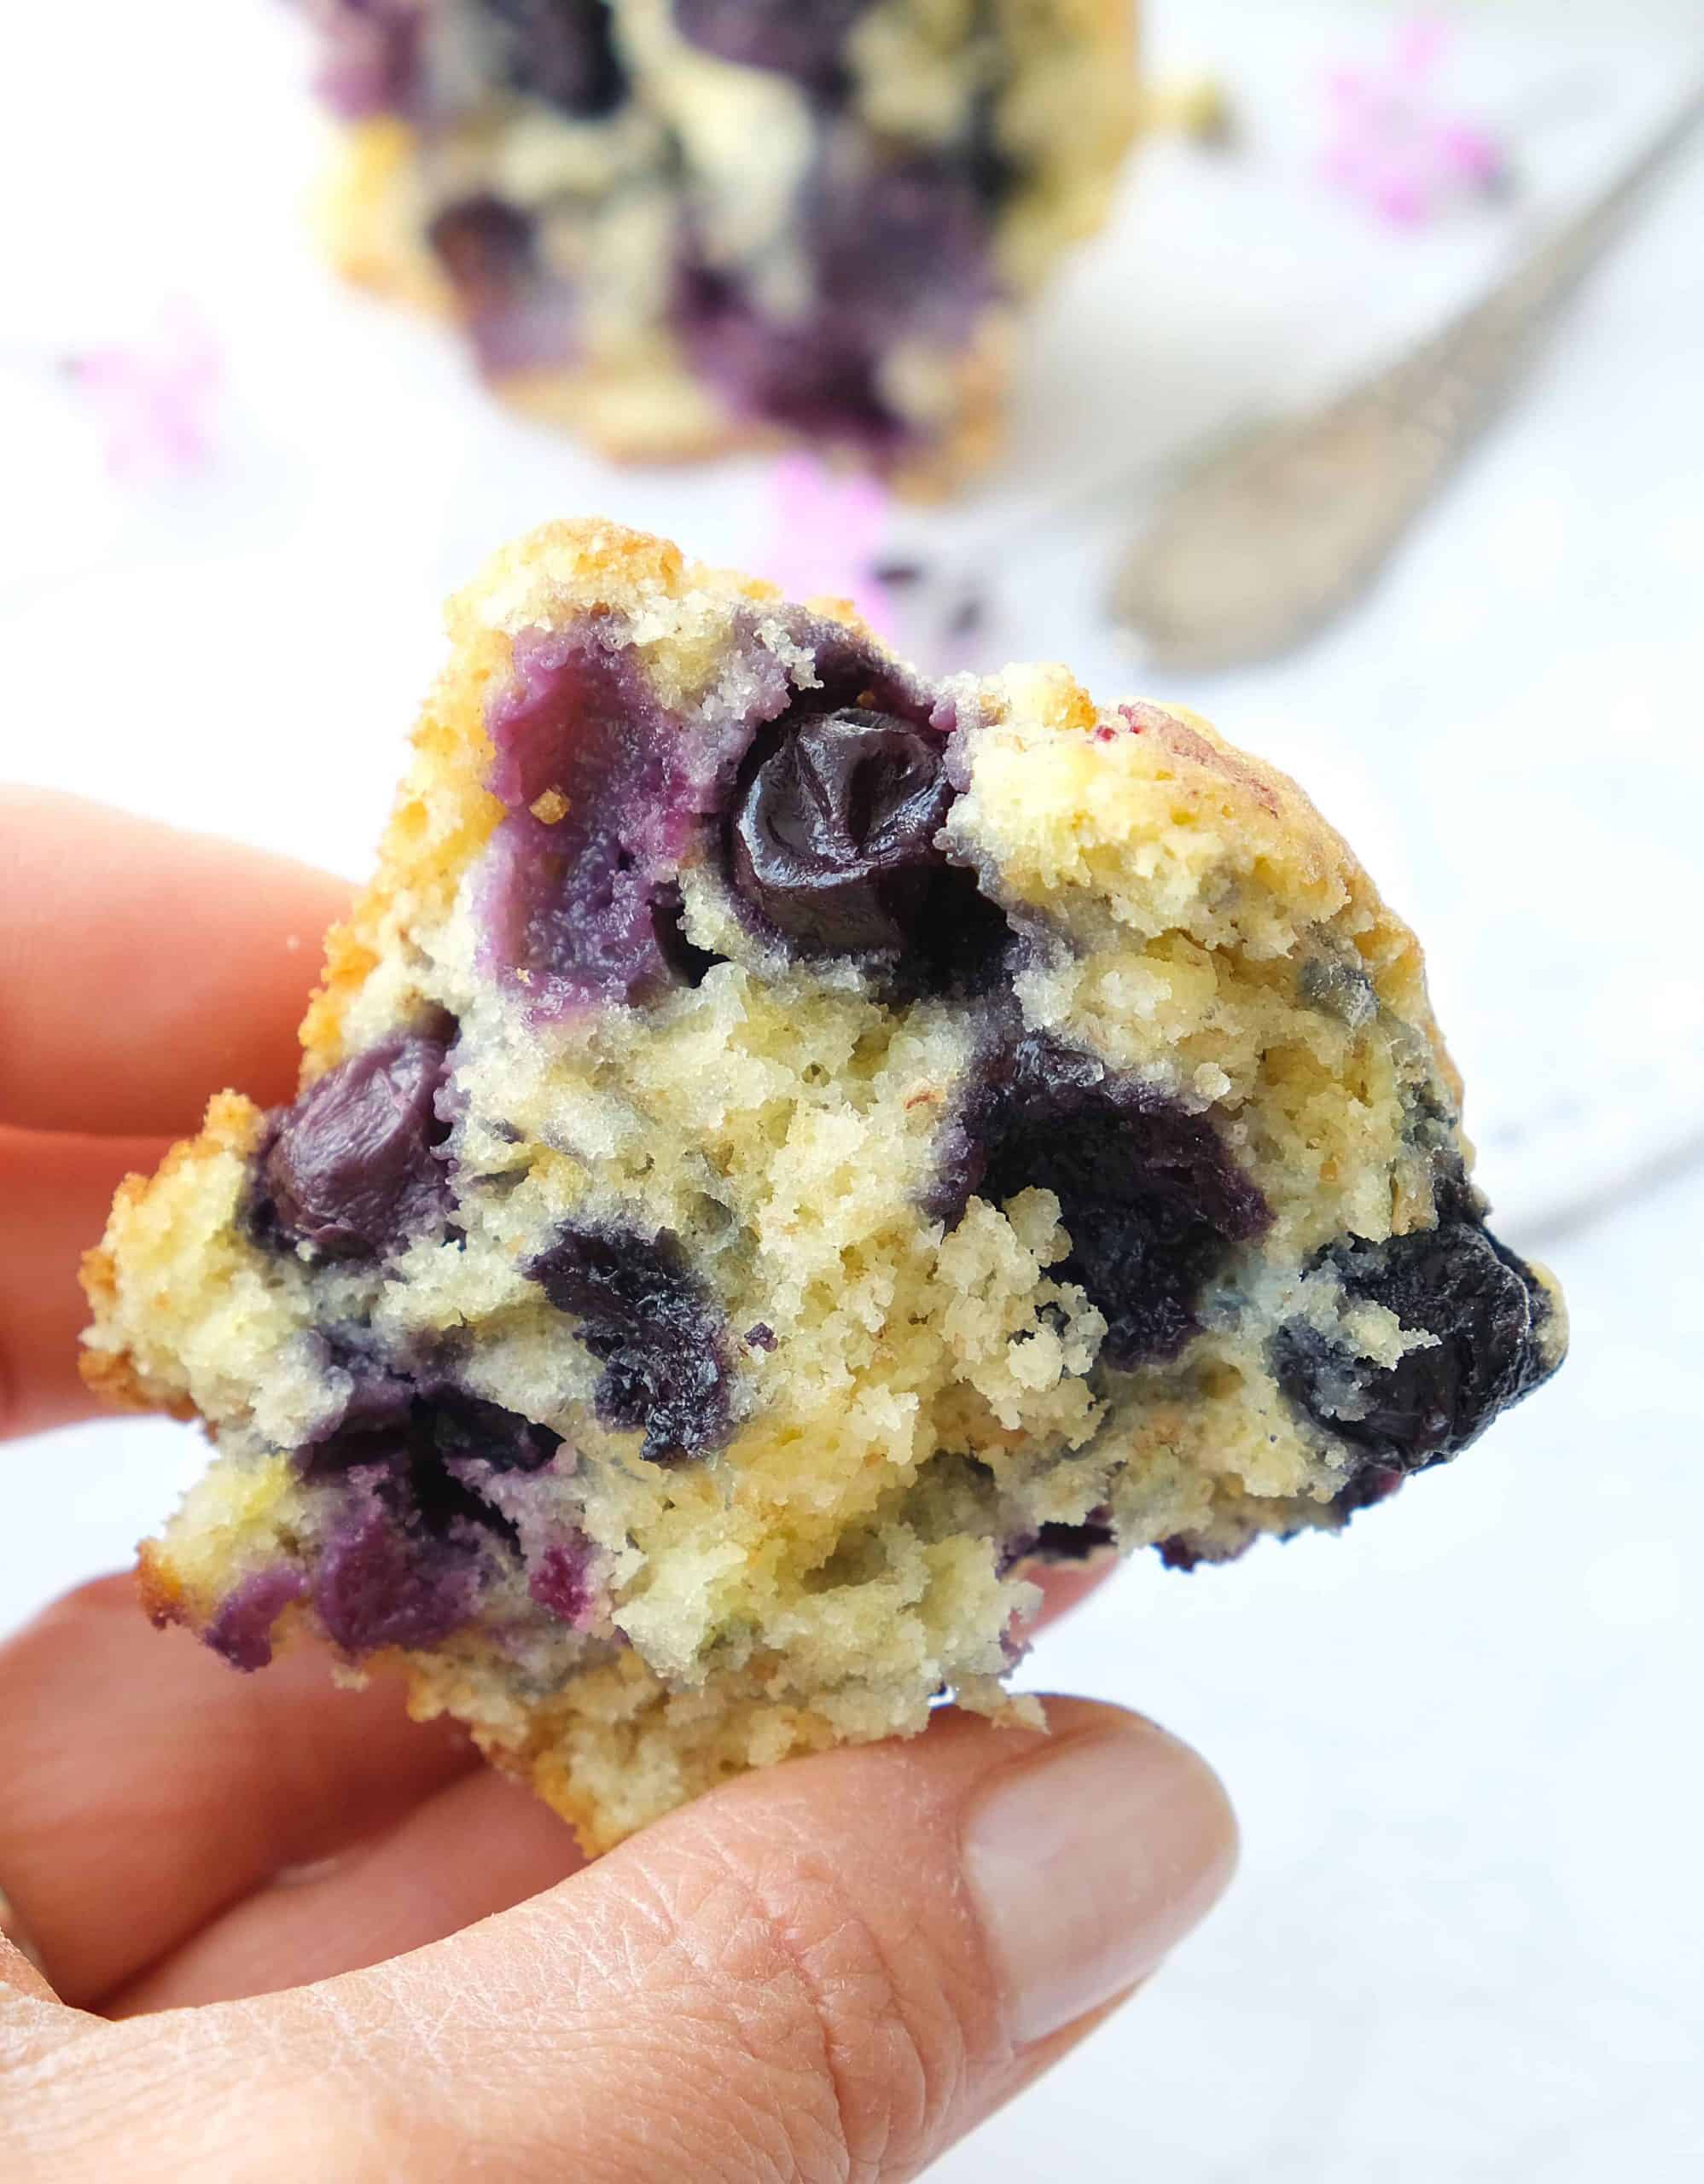 A hand holds a piece of lemon blueberry muffins showing the fluffy inside.